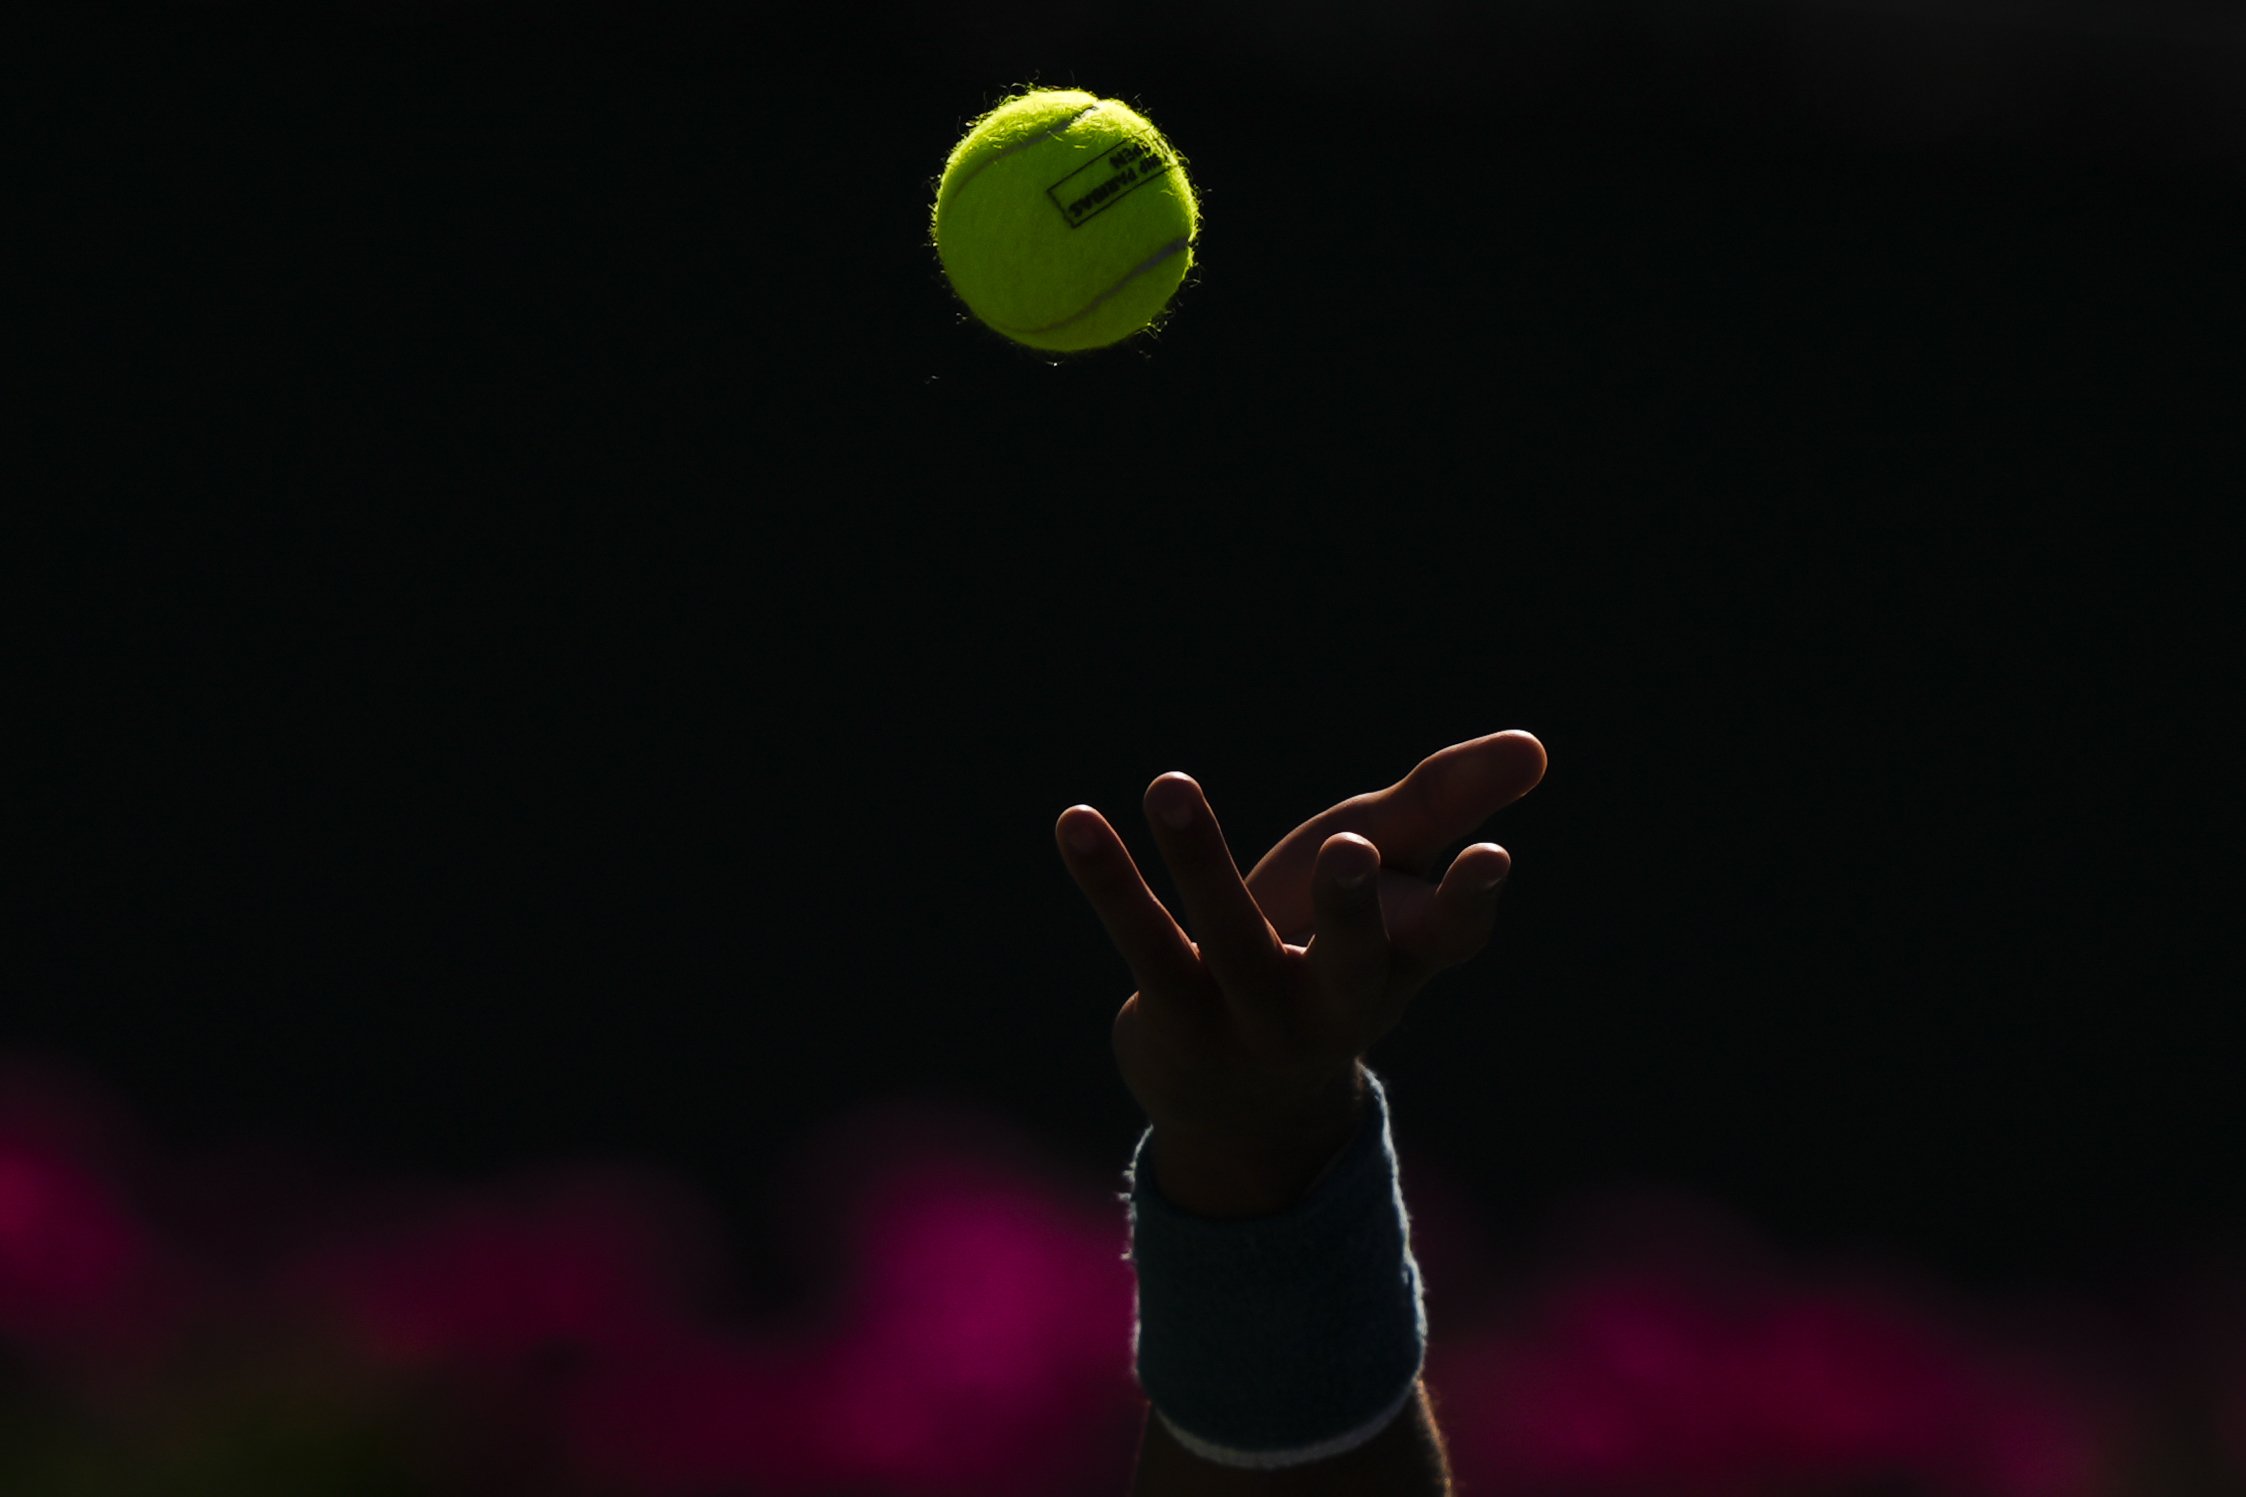  Arthur Fils, of France, serves against Casper Ruud, of Norway, at the BNP Paribas Open tennis tournament, Monday, March 11, 2024 in Indian Wells, Calif.  